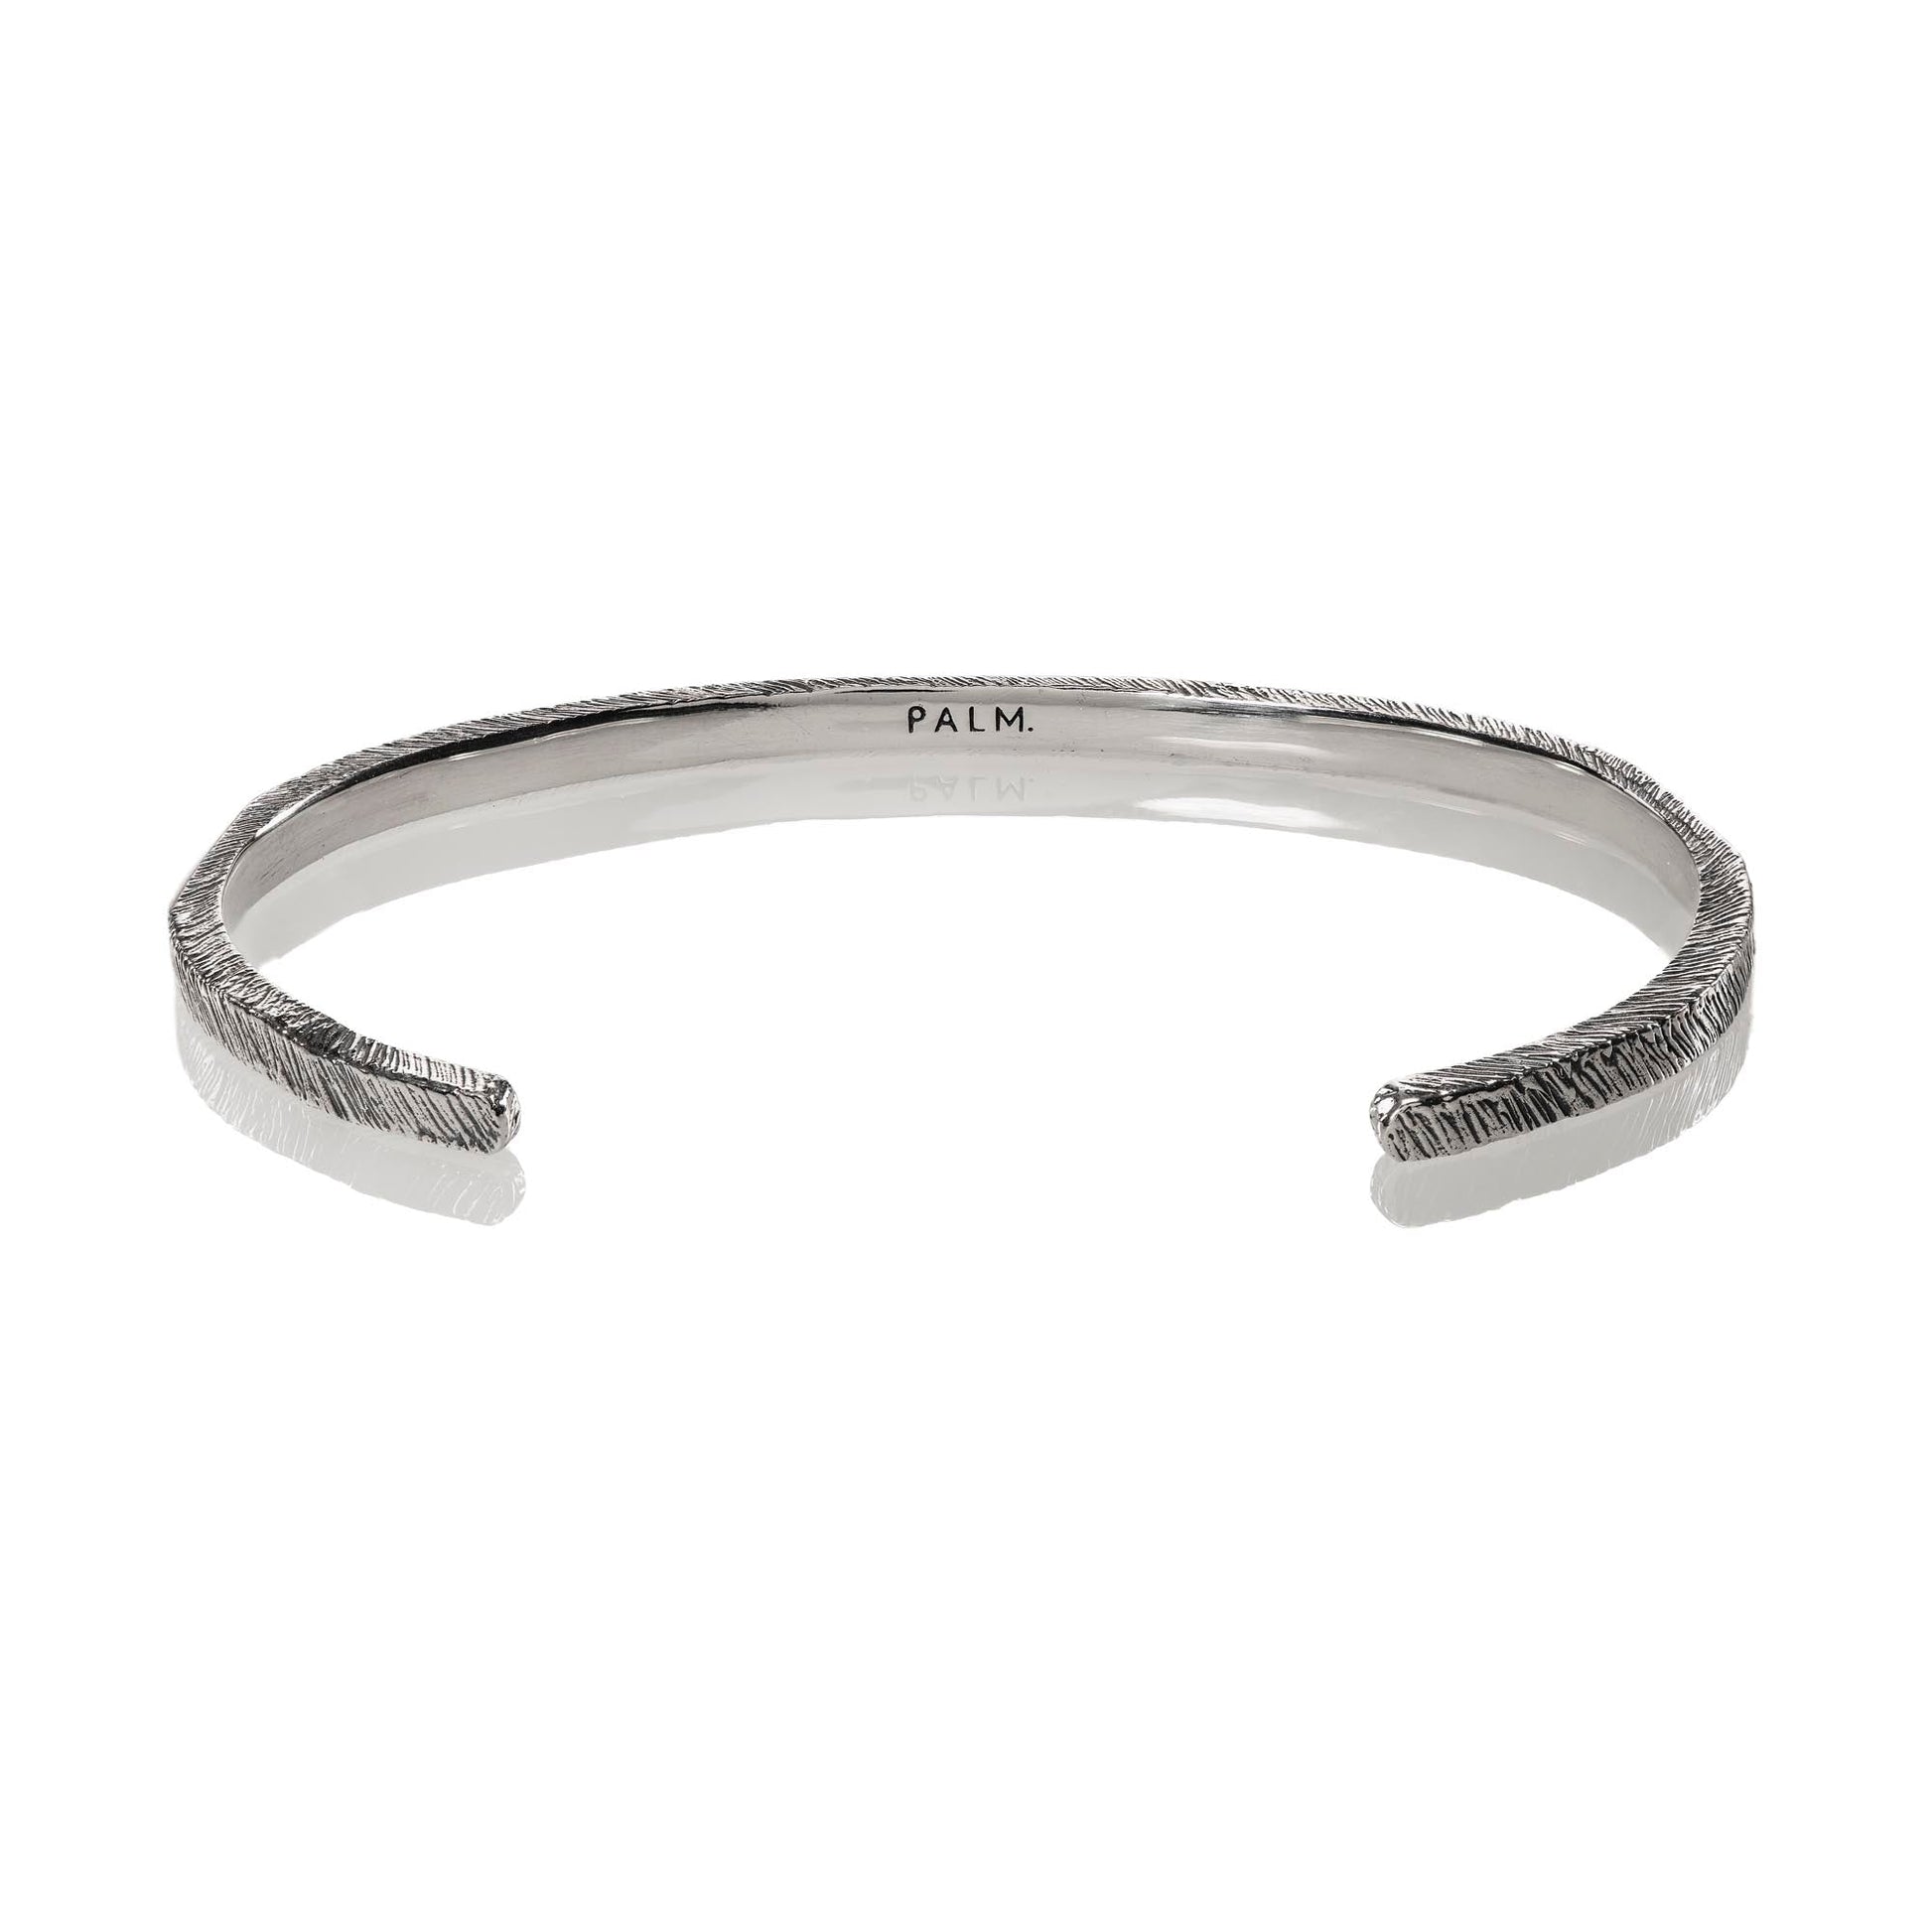 SPIRAL CUFF. - 925 Silver Bangle Bracelet 3mm - PALM. | Handcrafted Jewelry-